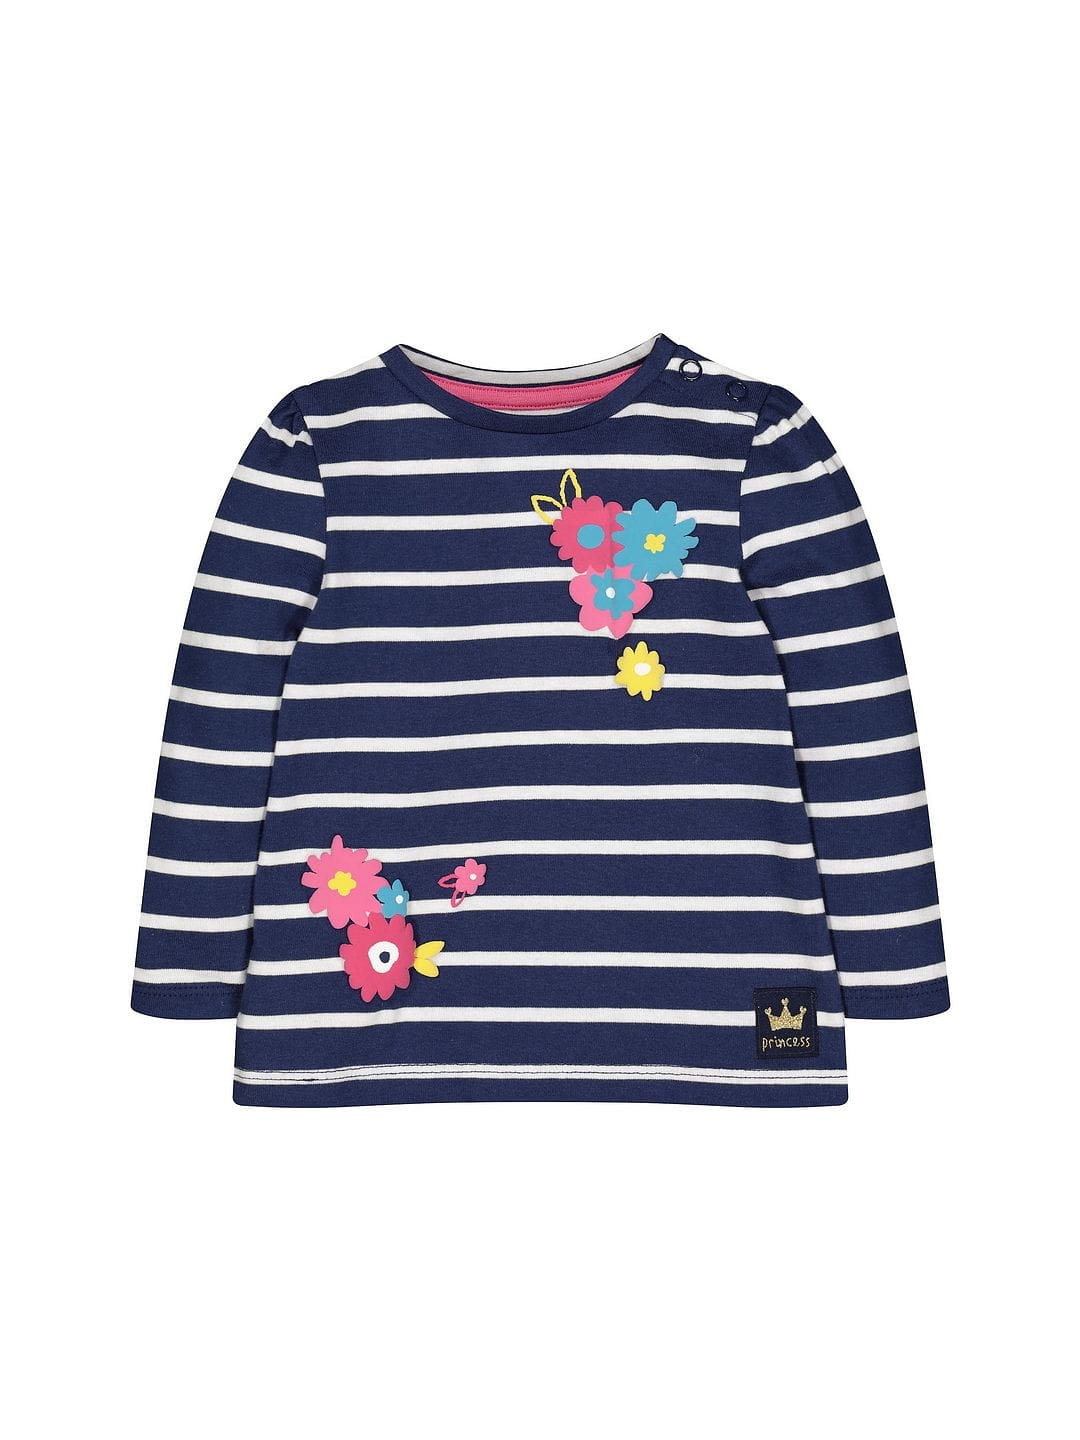 Mothercare | Navy Striped Flower T-Shirt 0